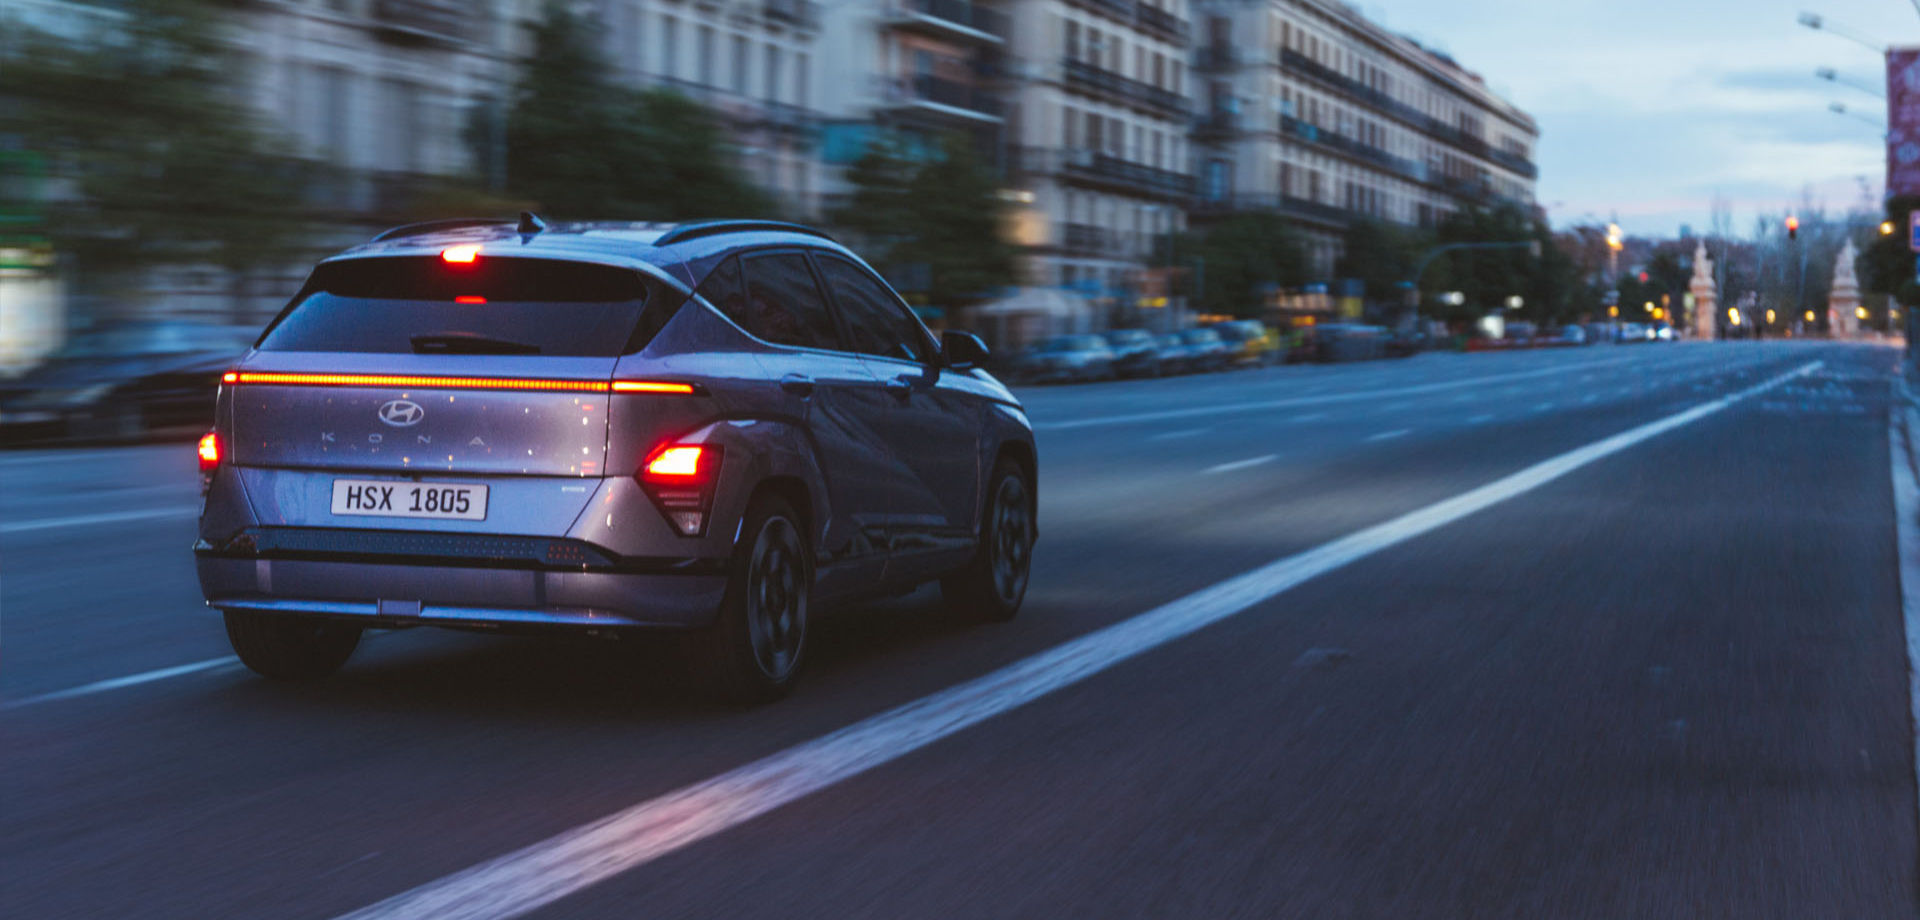 Rear view of The all-new KONA with red taillights running on a darkened city road.